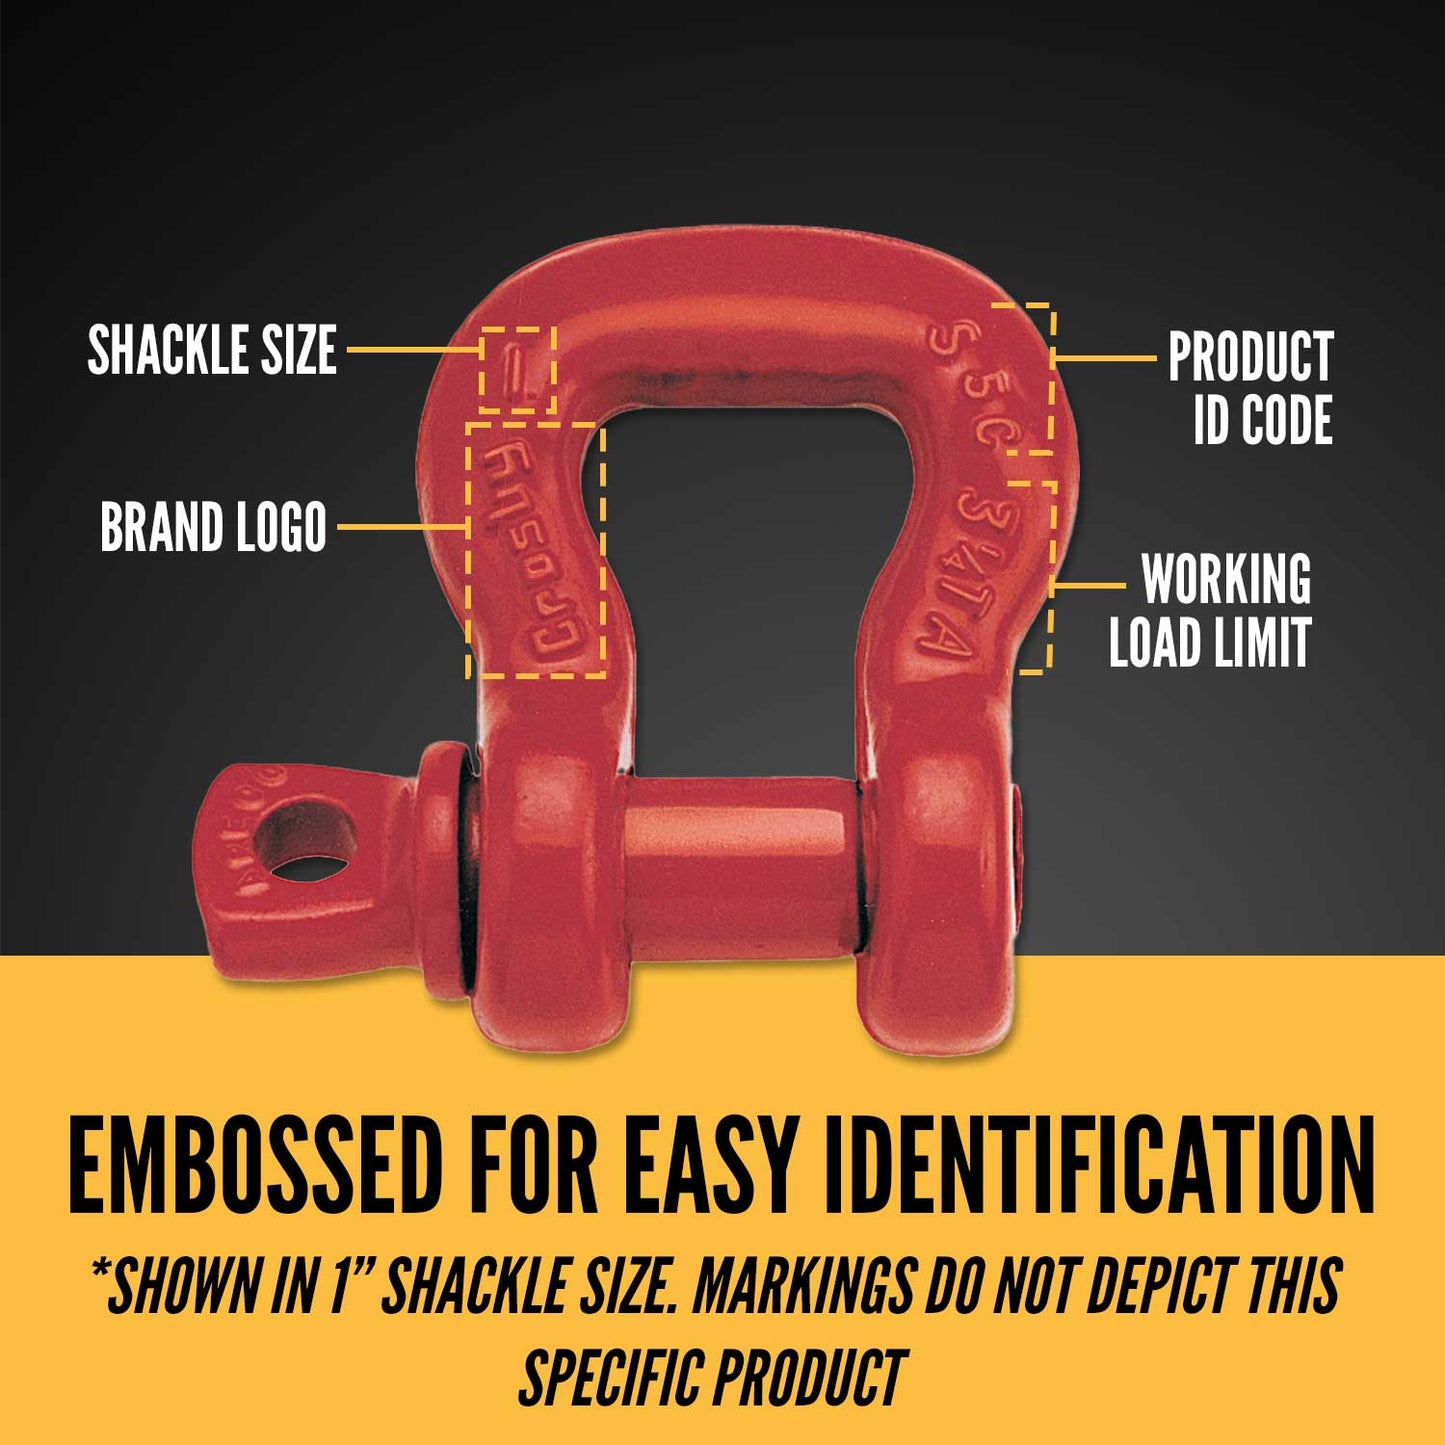 Crosby® Screw Pin Sling Saver Shackle | S-253 - 1-1/2"- 6.5 Ton embossed for easy identification